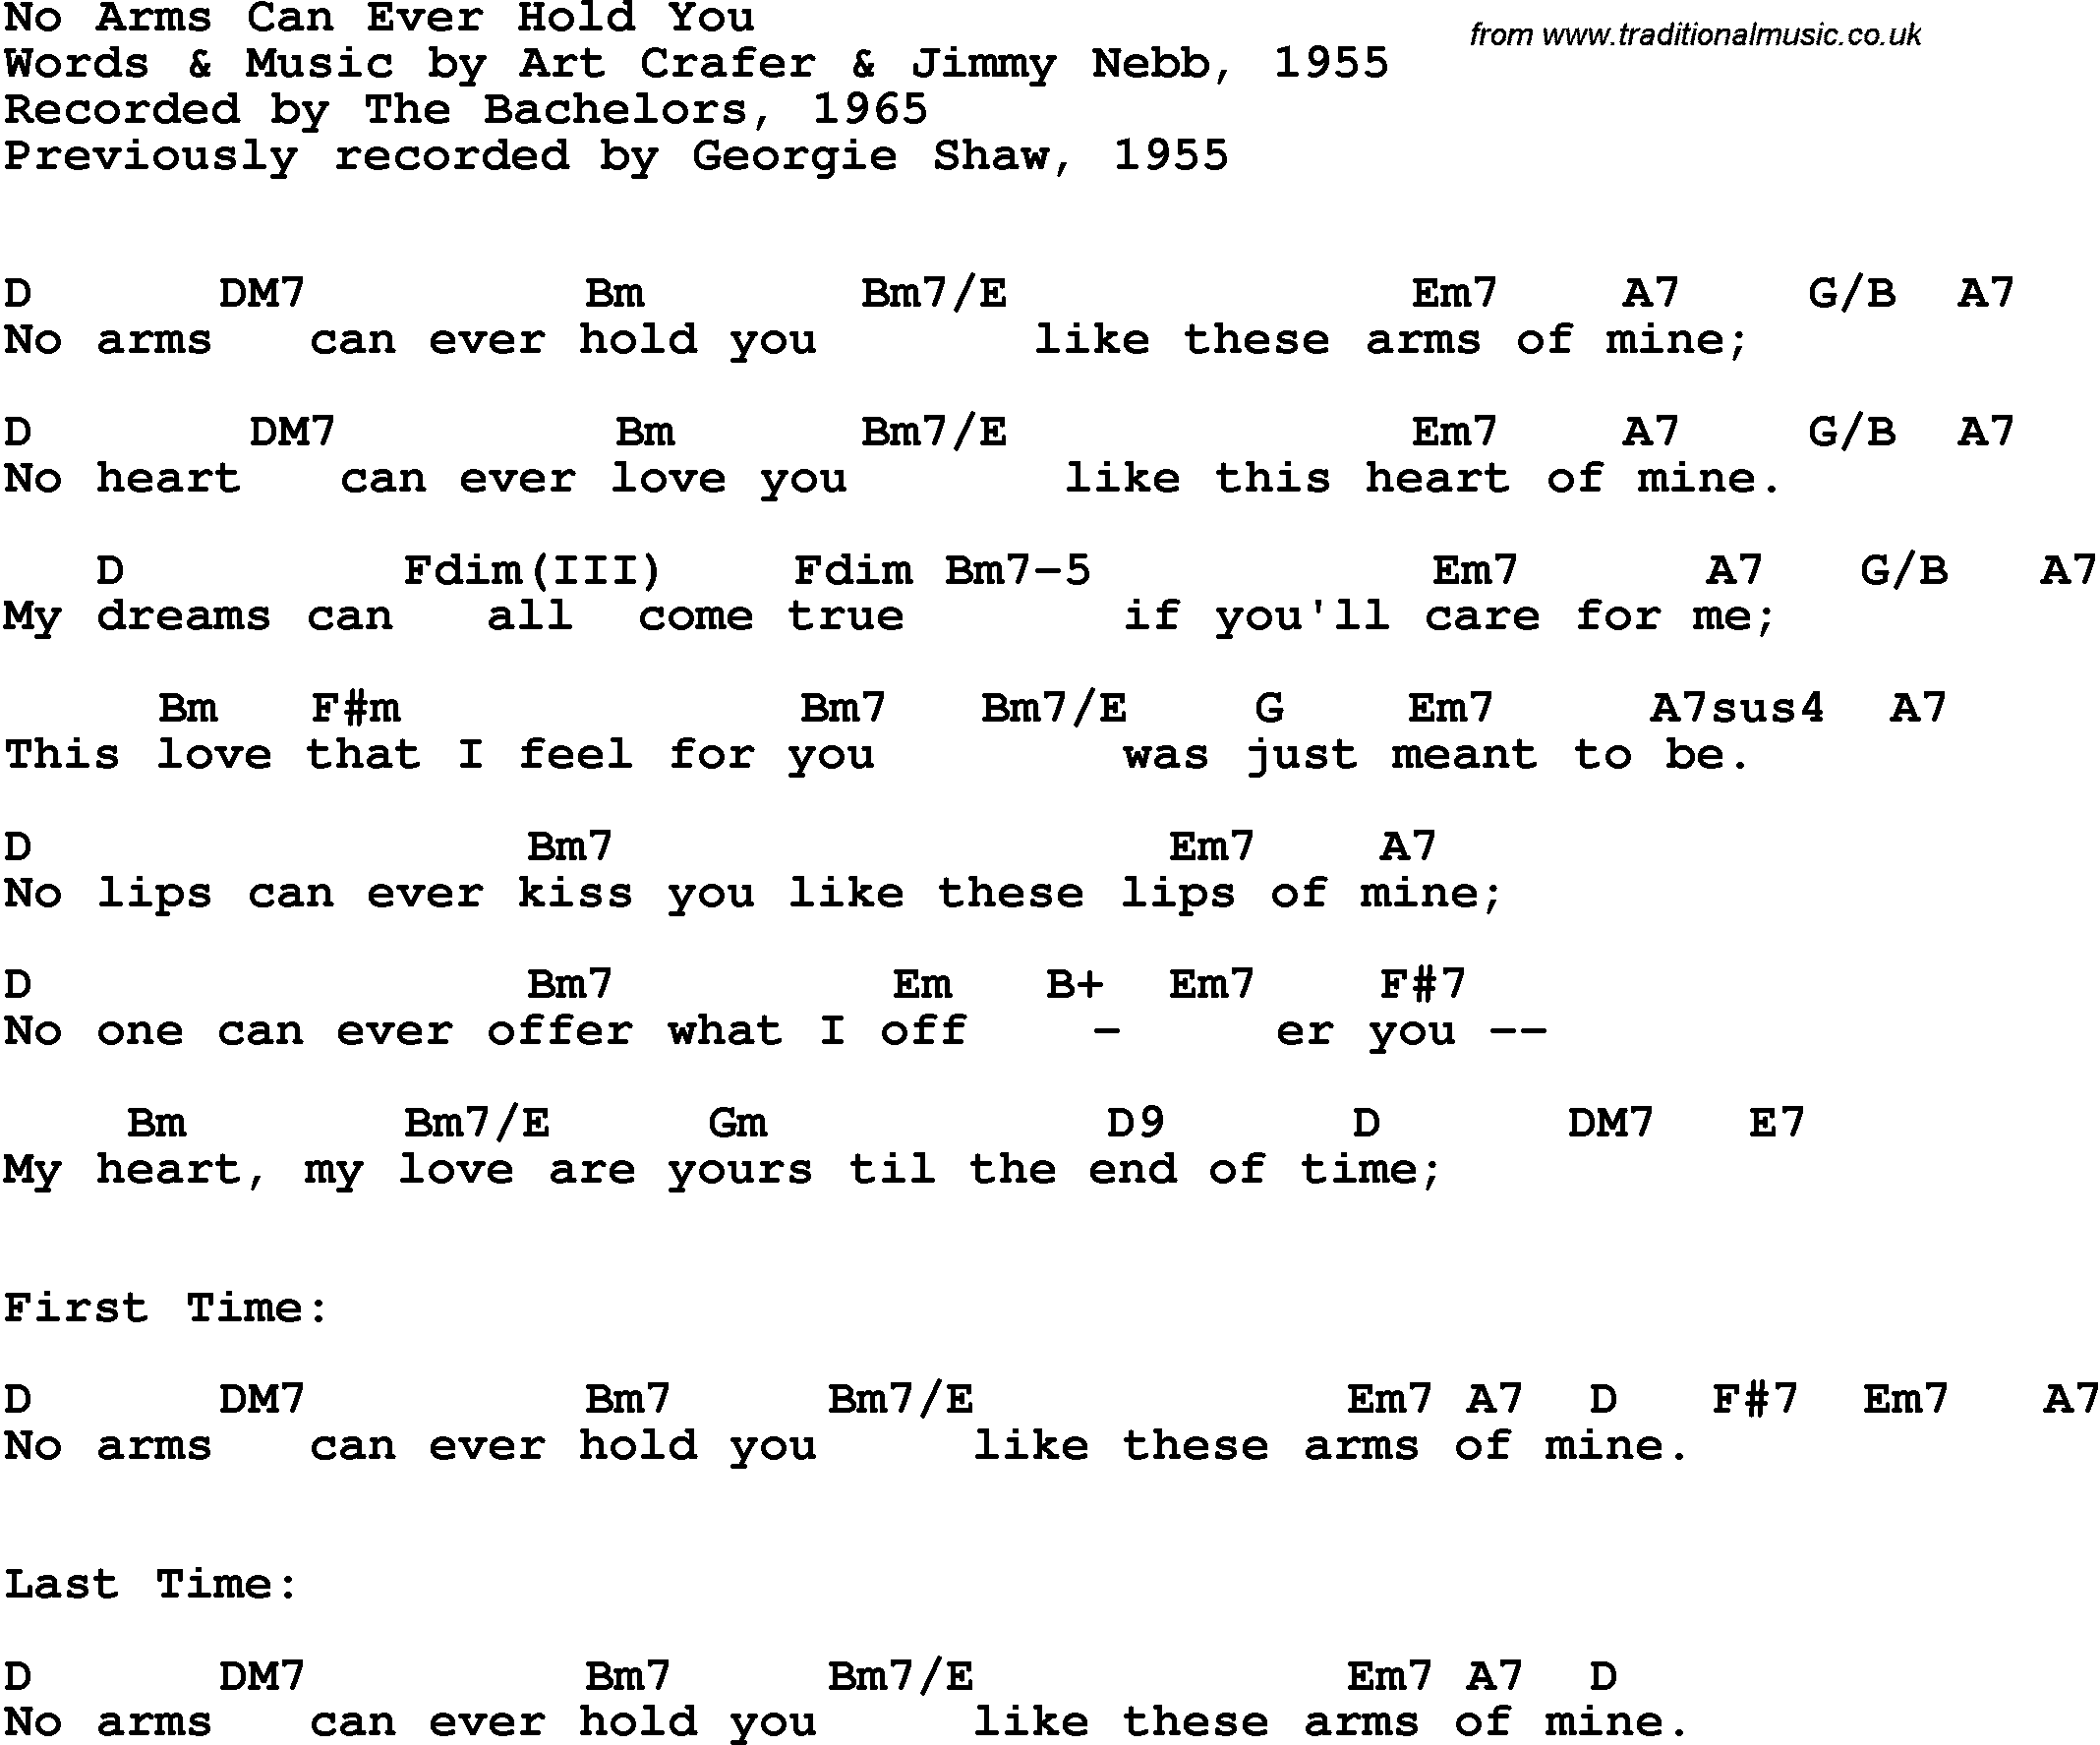 Song Lyrics with guitar chords for No Arms Can Ever Hold You - The Bachelors, 1965